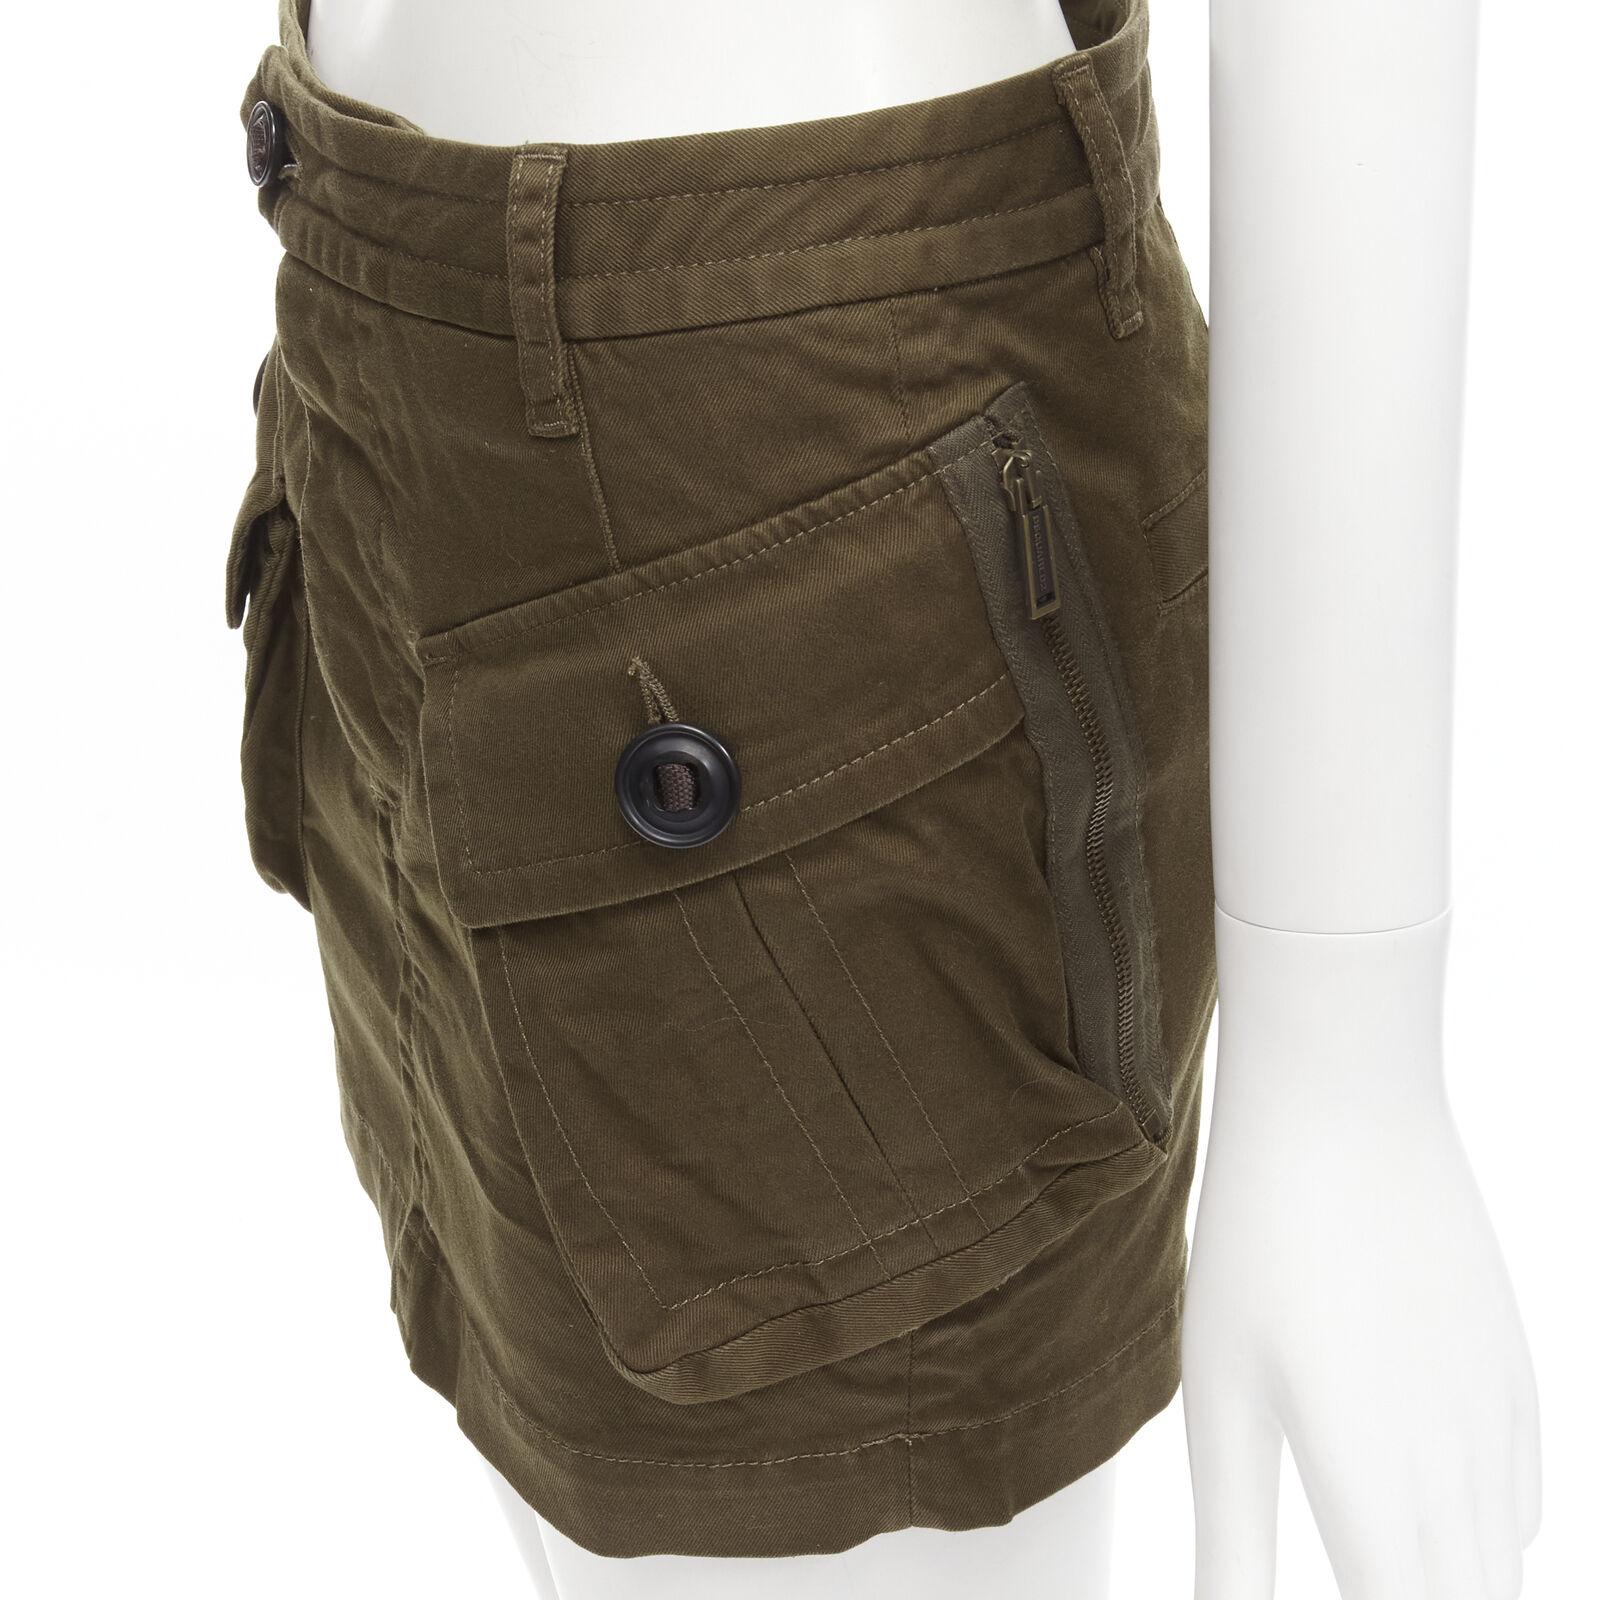 DSQUARED2 2020 dark green oversized cargo pocket mini skirt IT36 XXS
Reference: AAWC/A00307
Brand: Dsquared2
Collection: 2020
Material: Cotton, Blend
Color: Green
Pattern: Solid
Closure: Button Fly
Extra Details: Pockets with side zip details.
Made